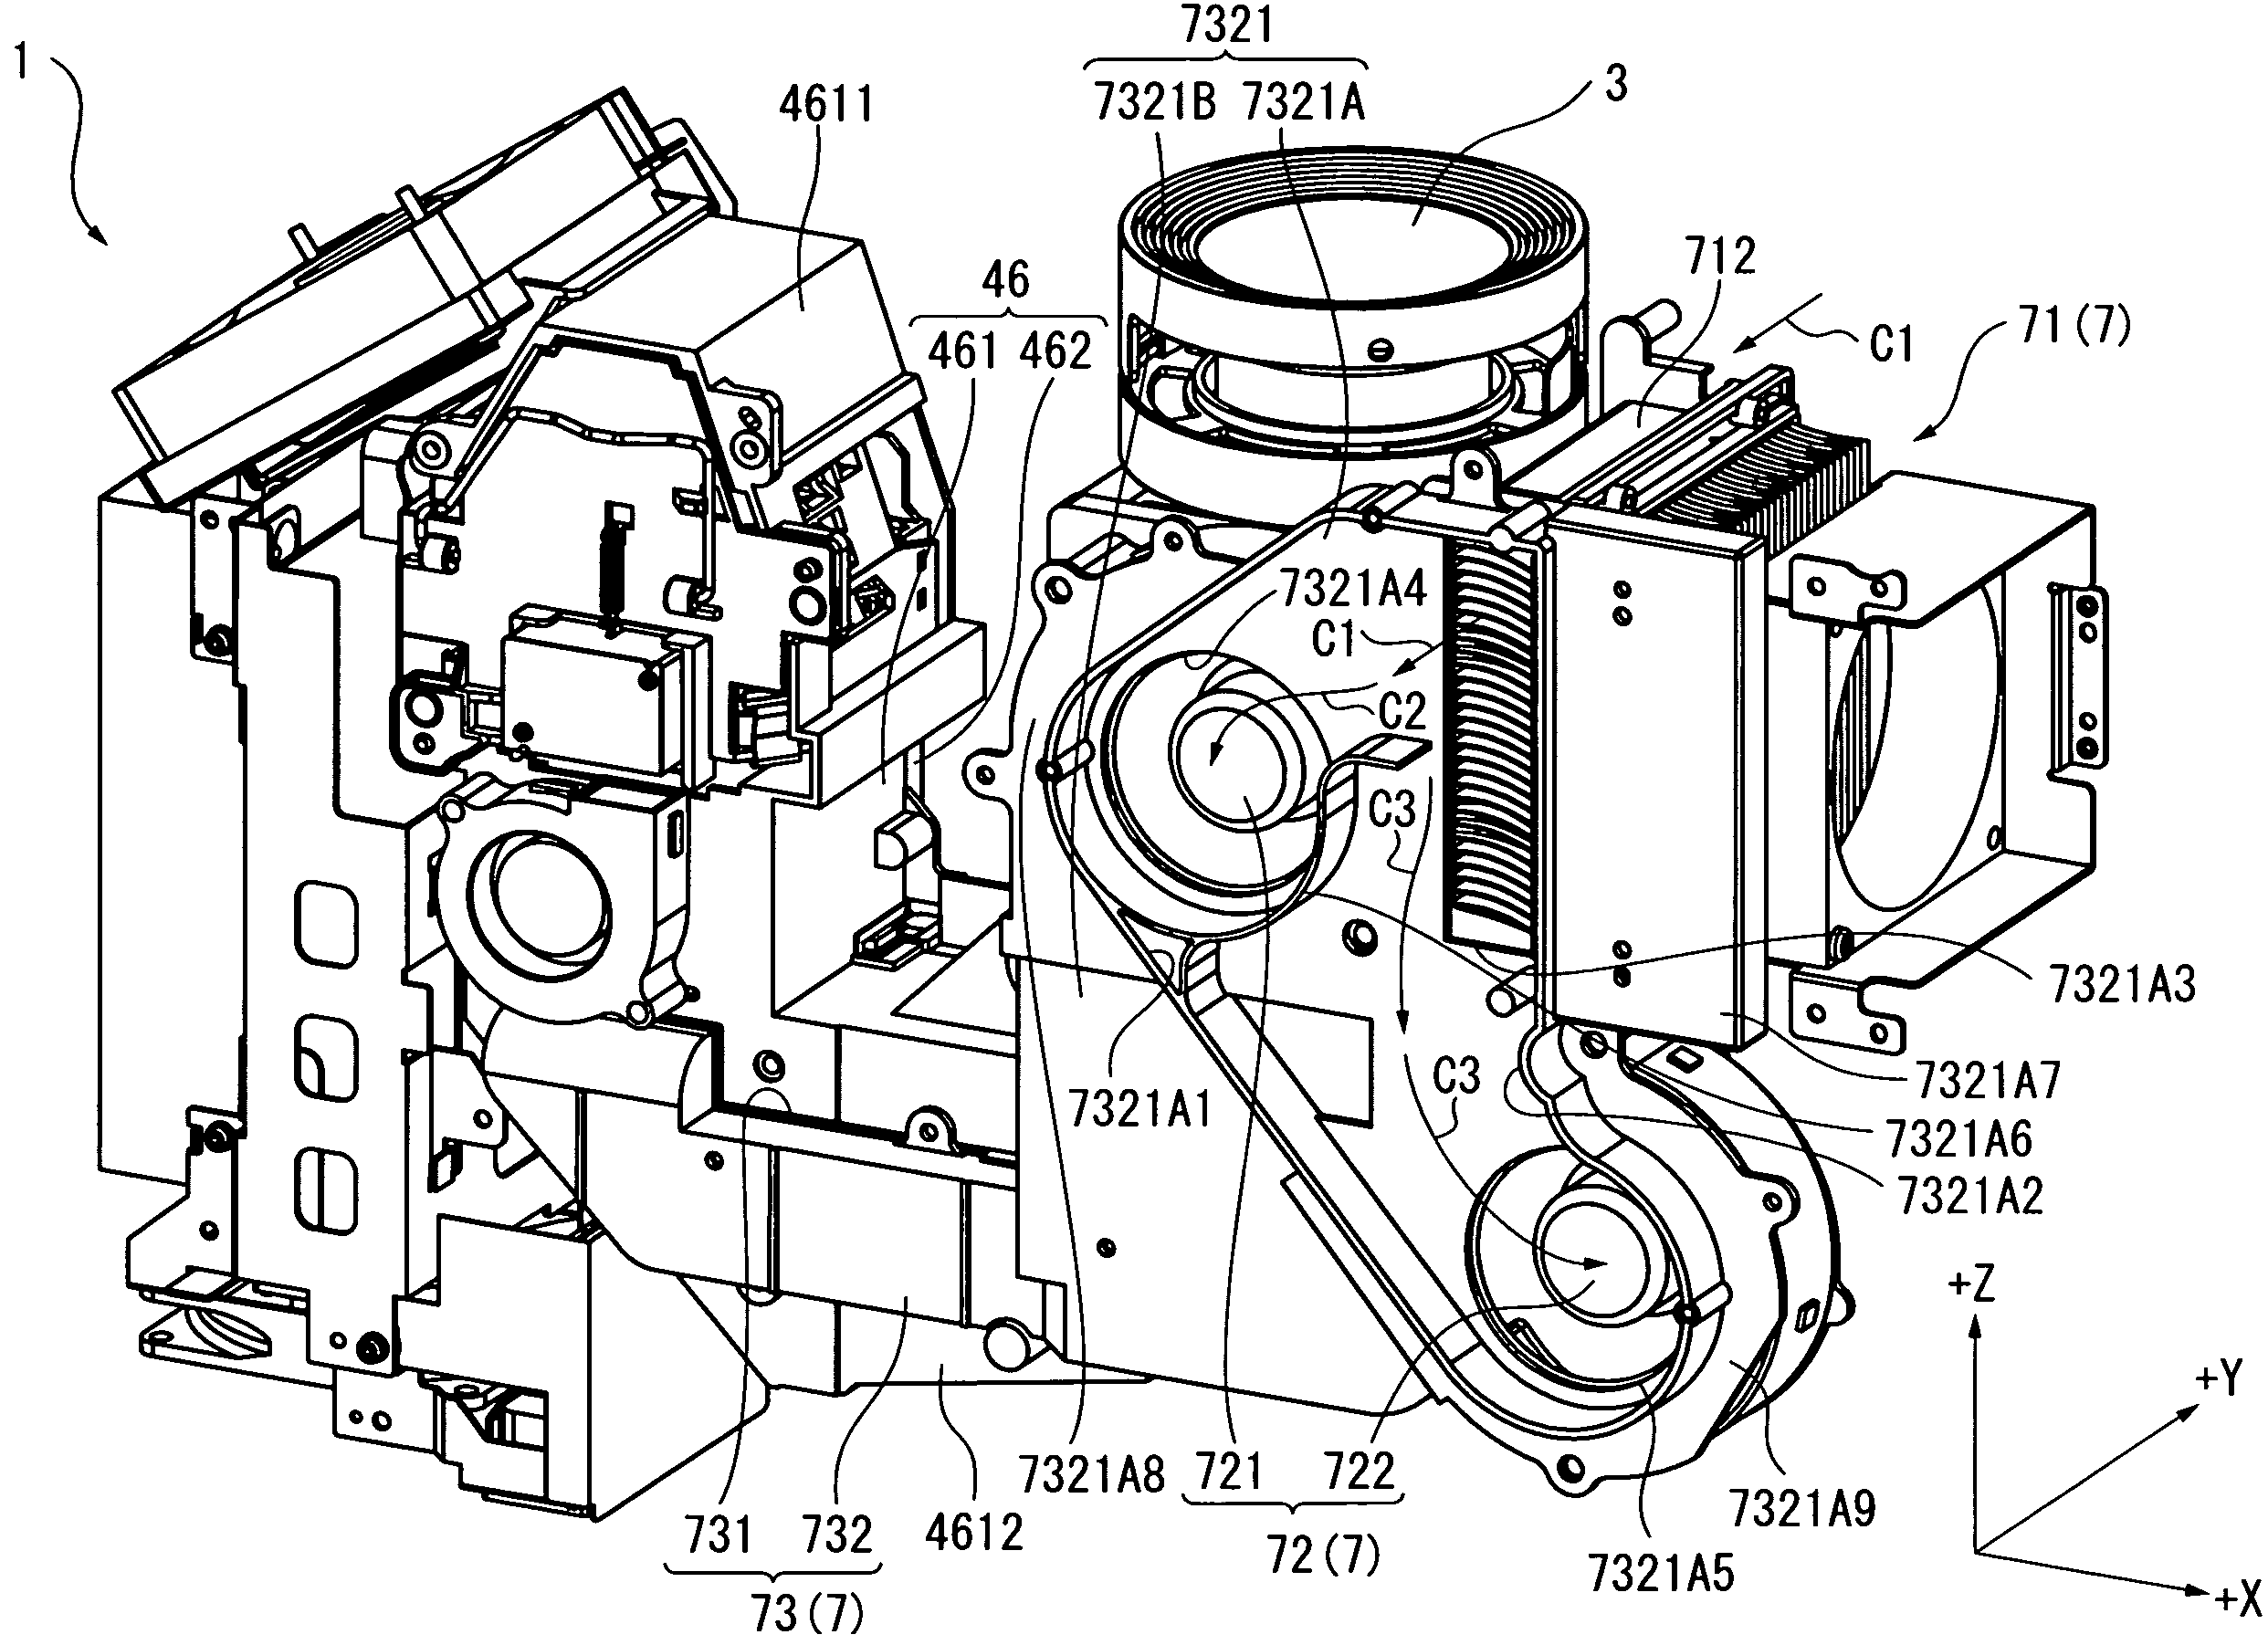 Cooling device and projector